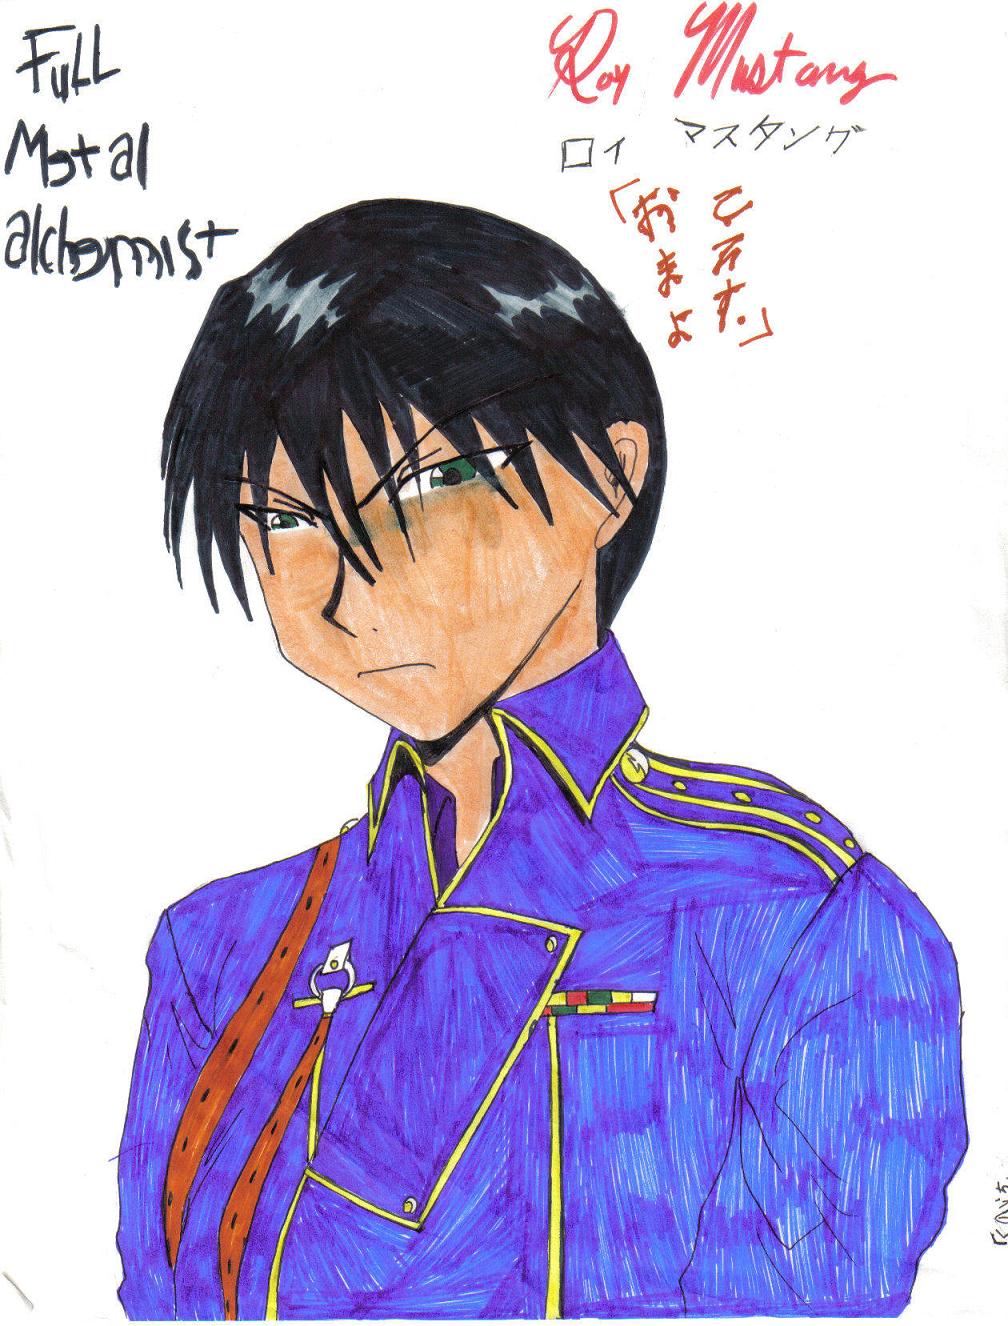 Roy Mustang by miss_jelly